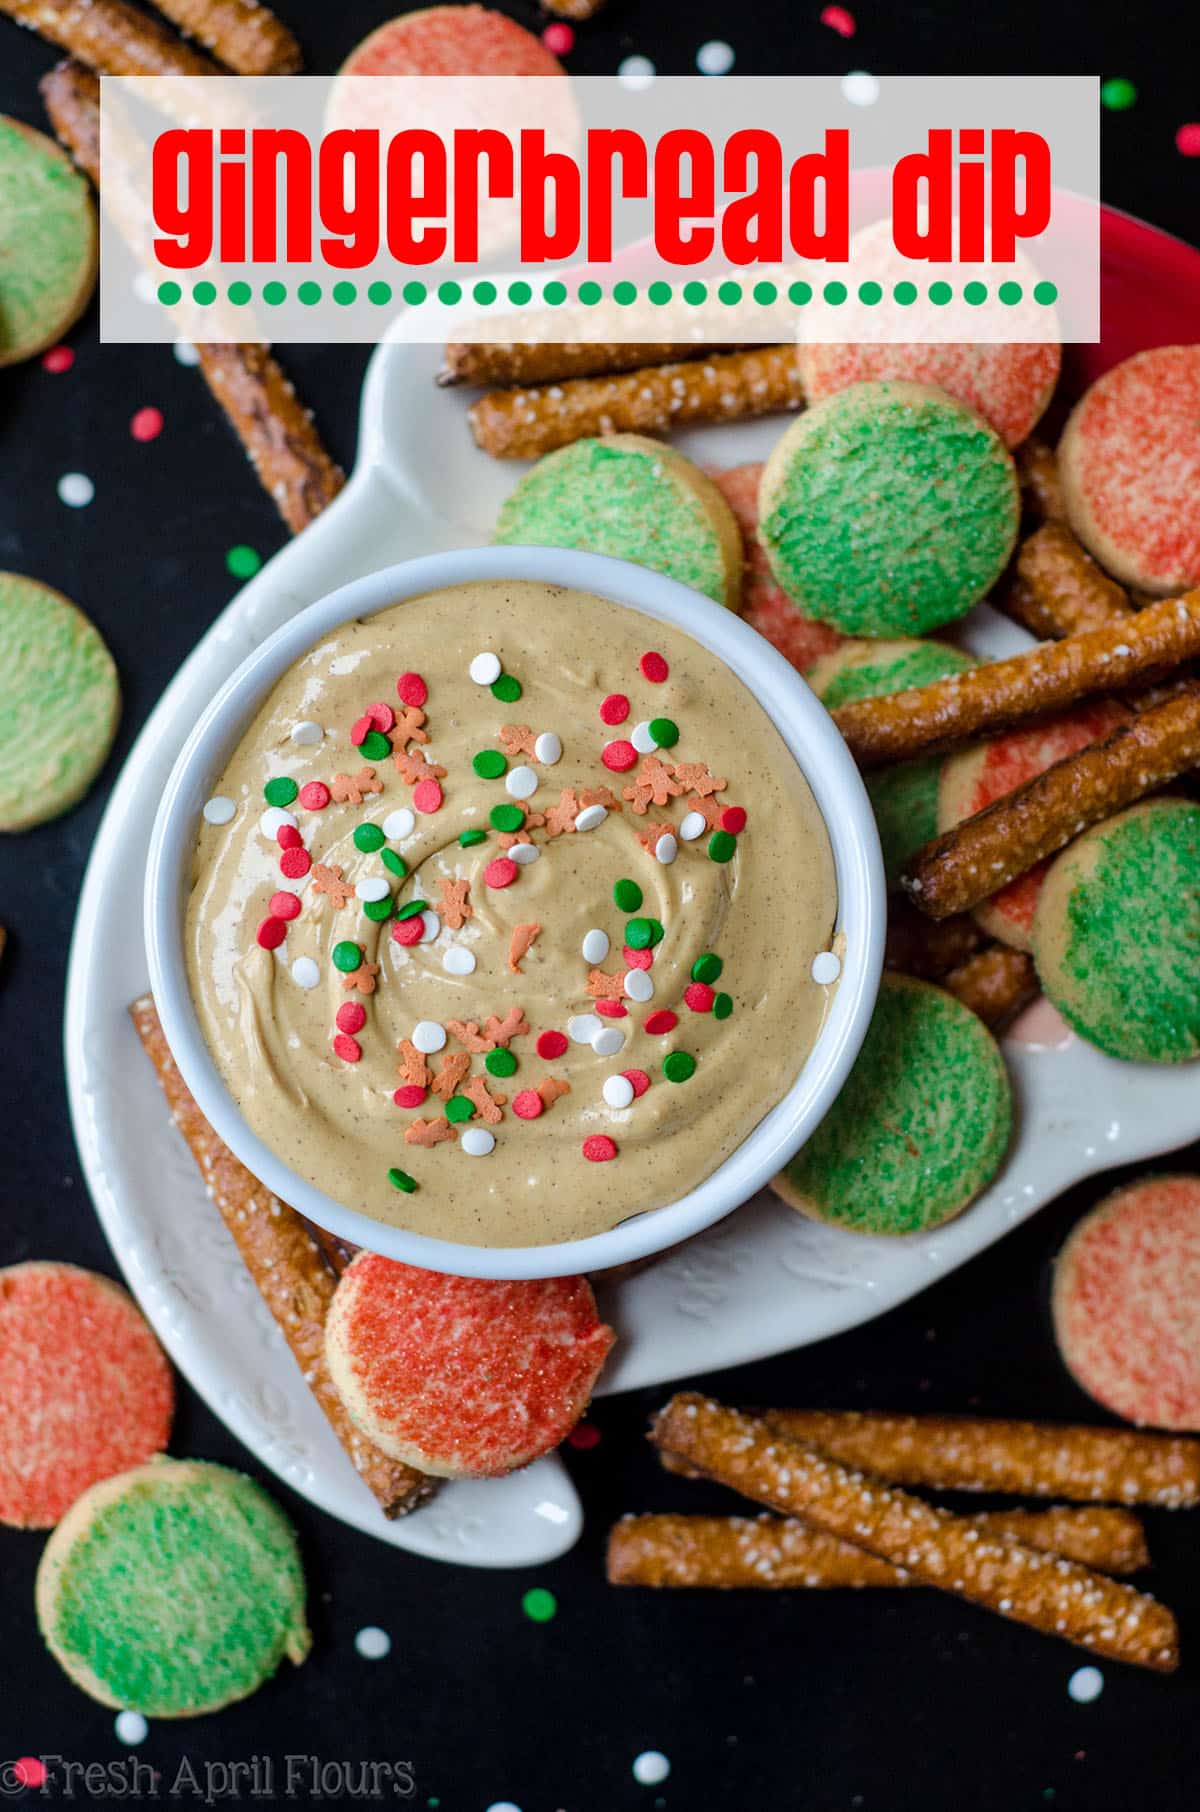 Gingerbread Dip: A smooth and velvety cream cheese dip flavored with molasses and seasonal spices.  via @frshaprilflours